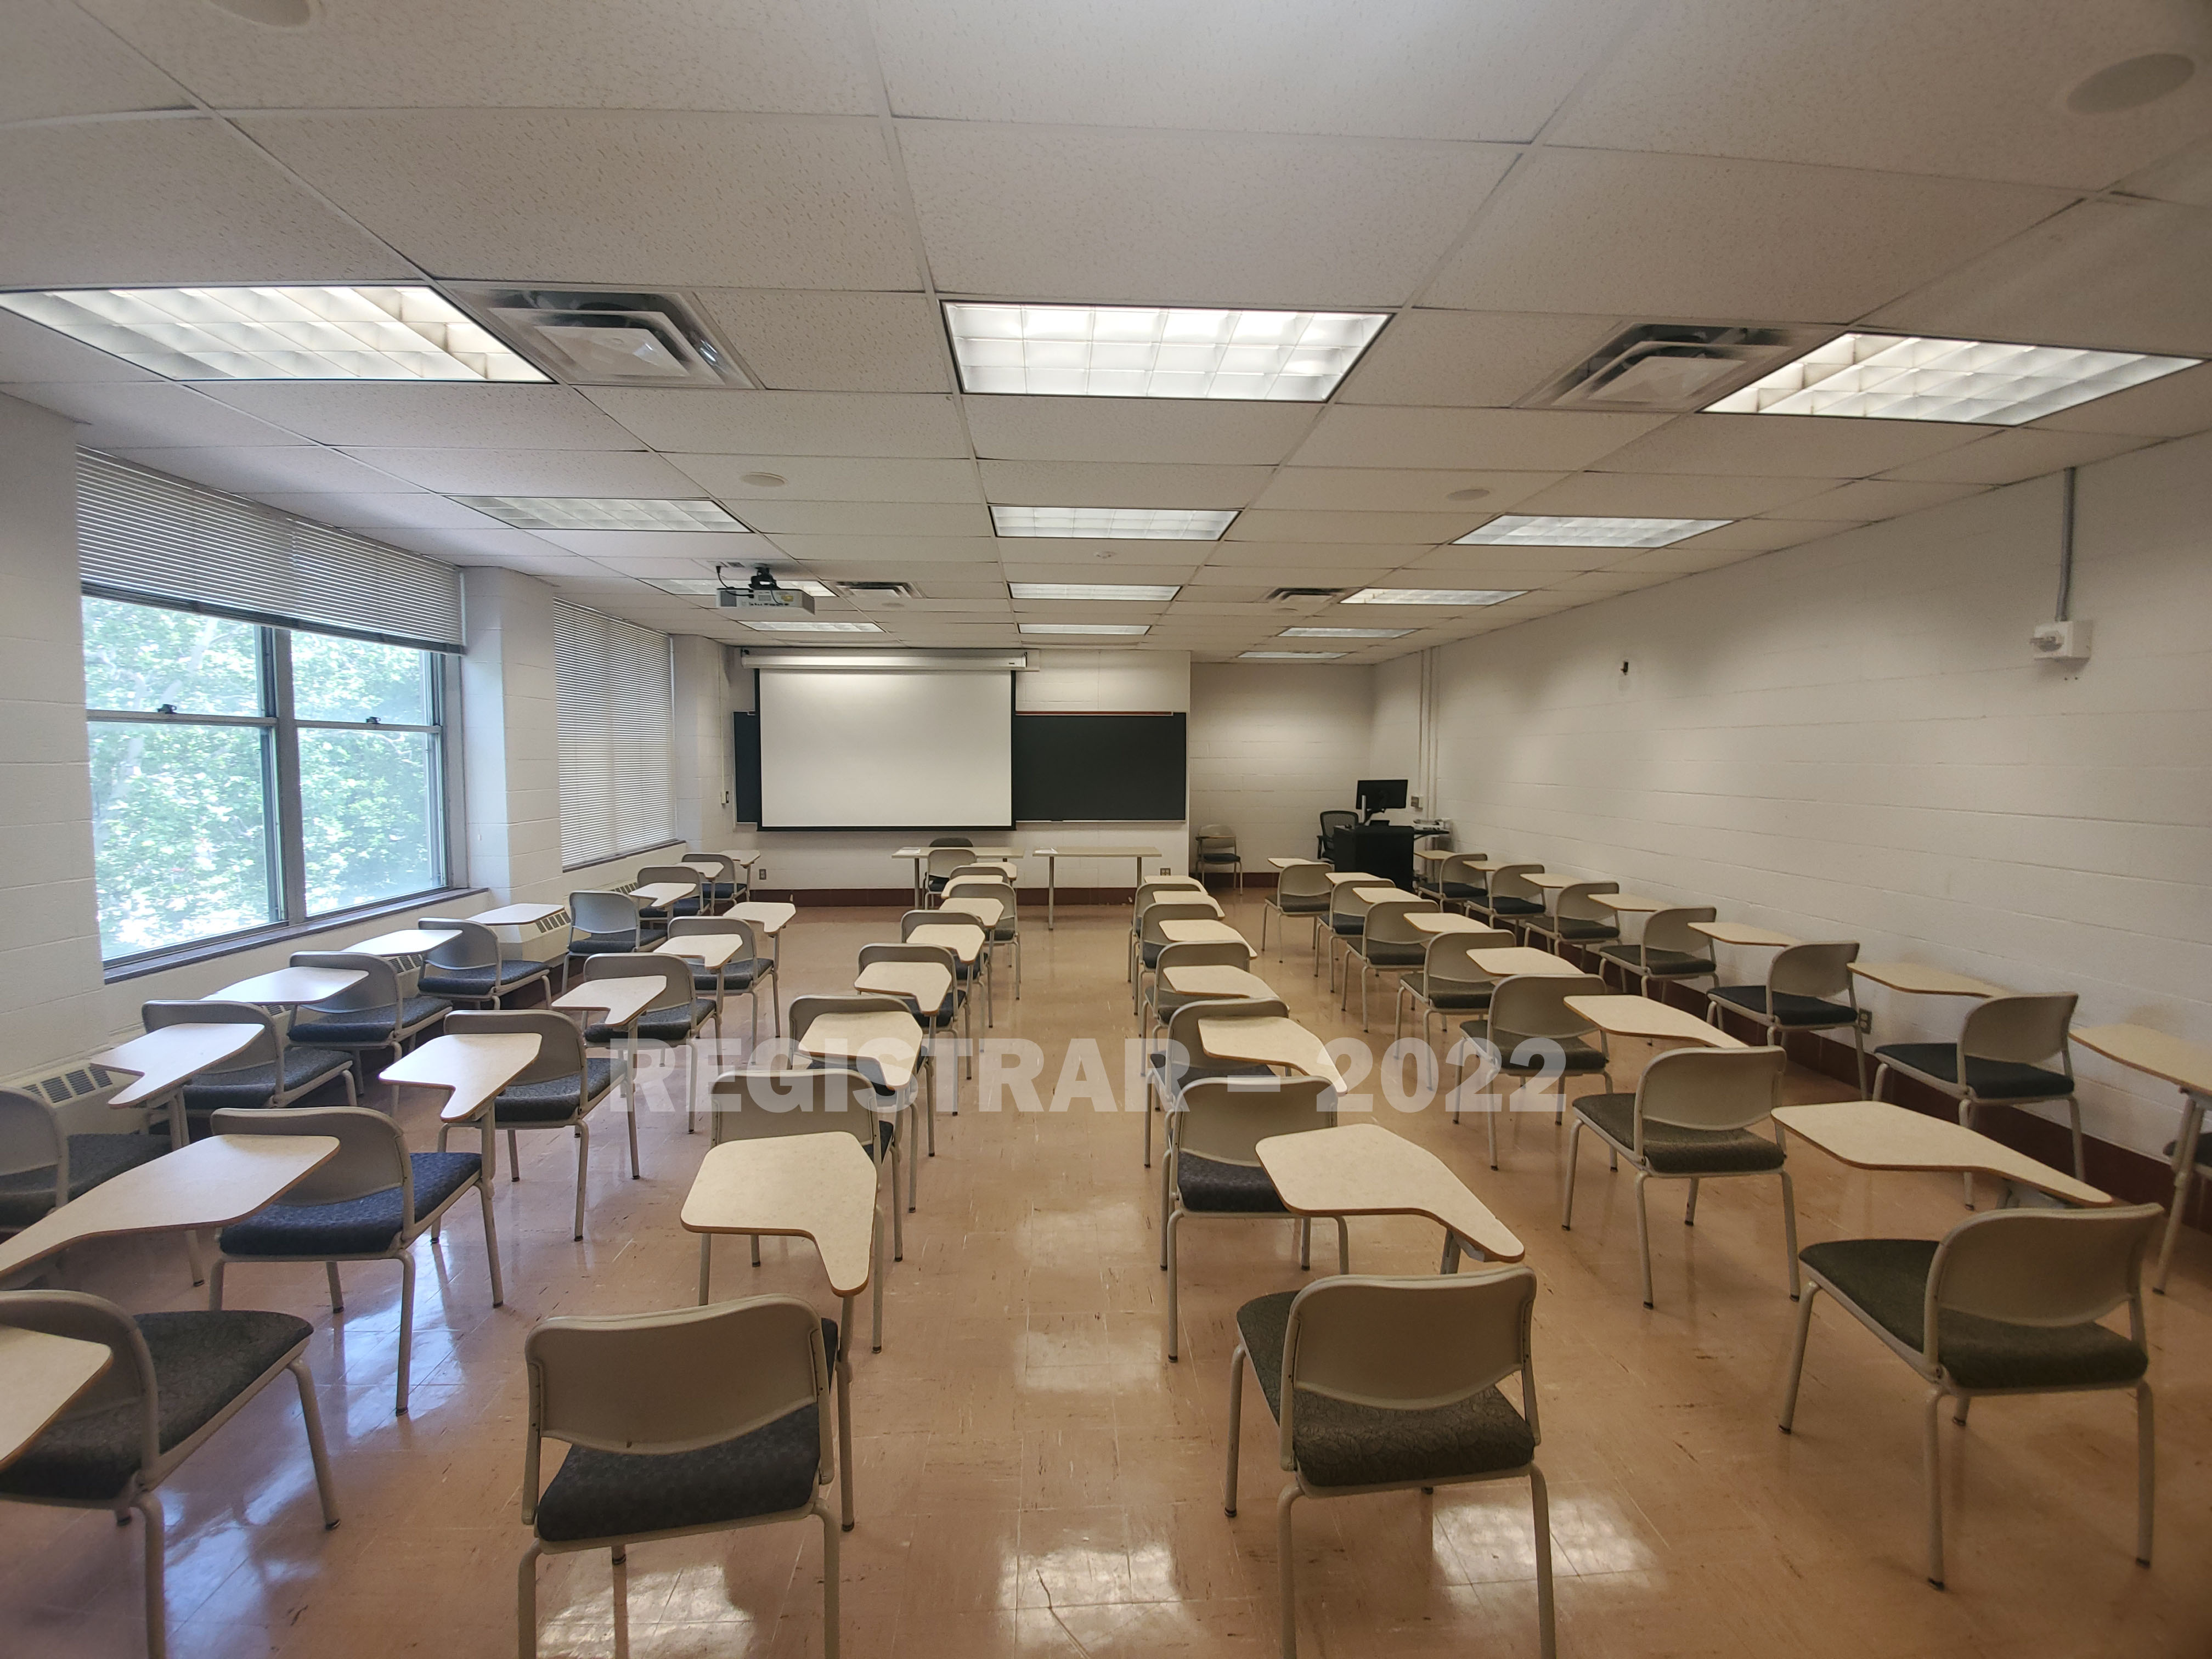 Animal Science Building room 202 ultra wide angle view from the back of the room with projector screen down